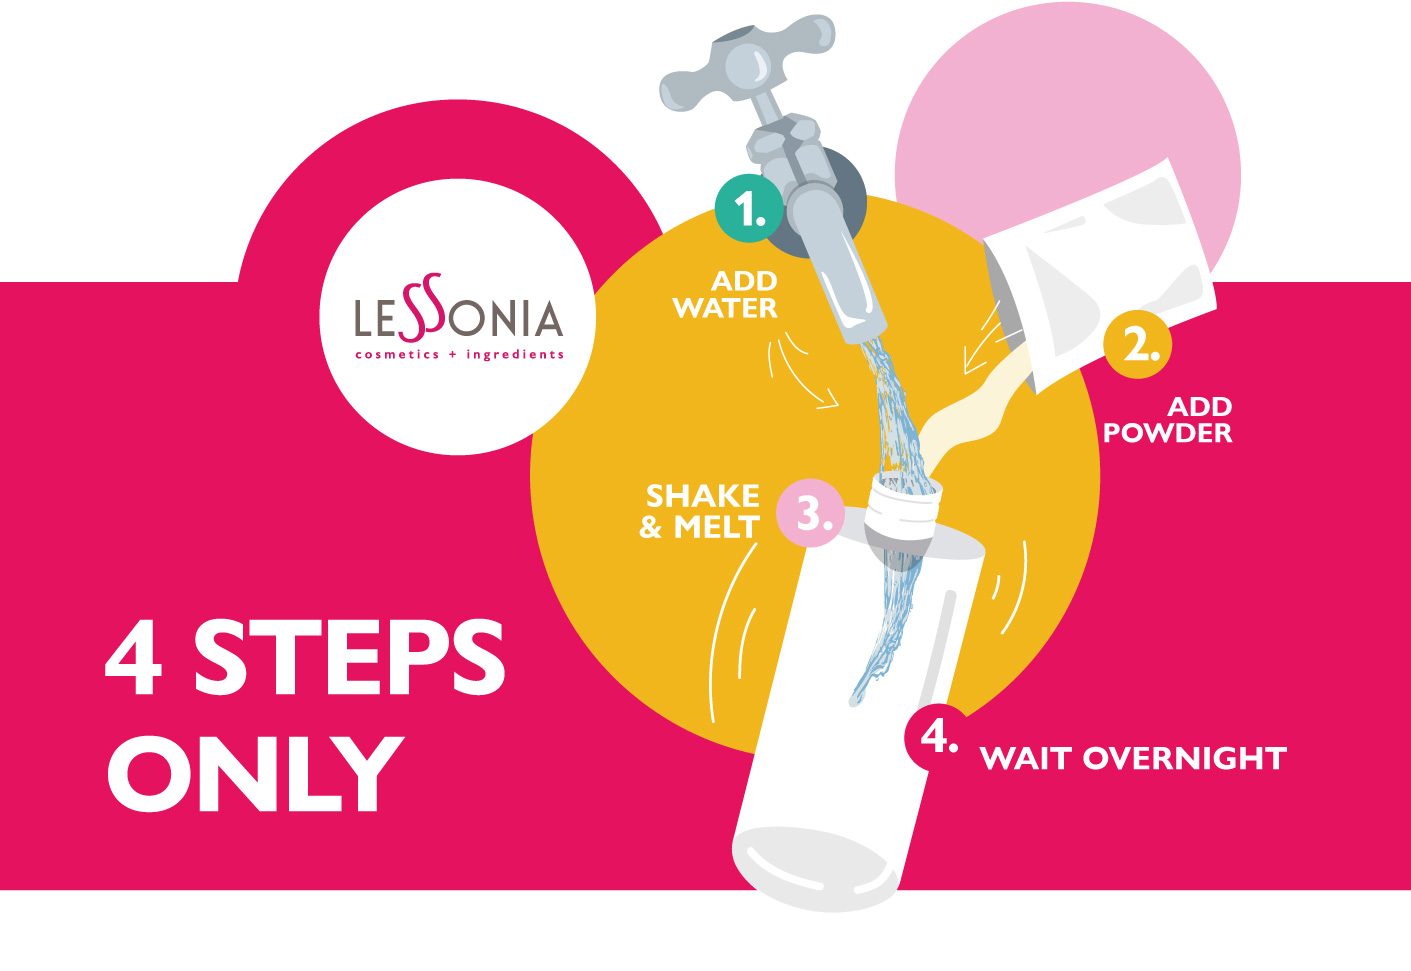 lessonia-rexplore-beauty-4-steps-to-rehydrate-product